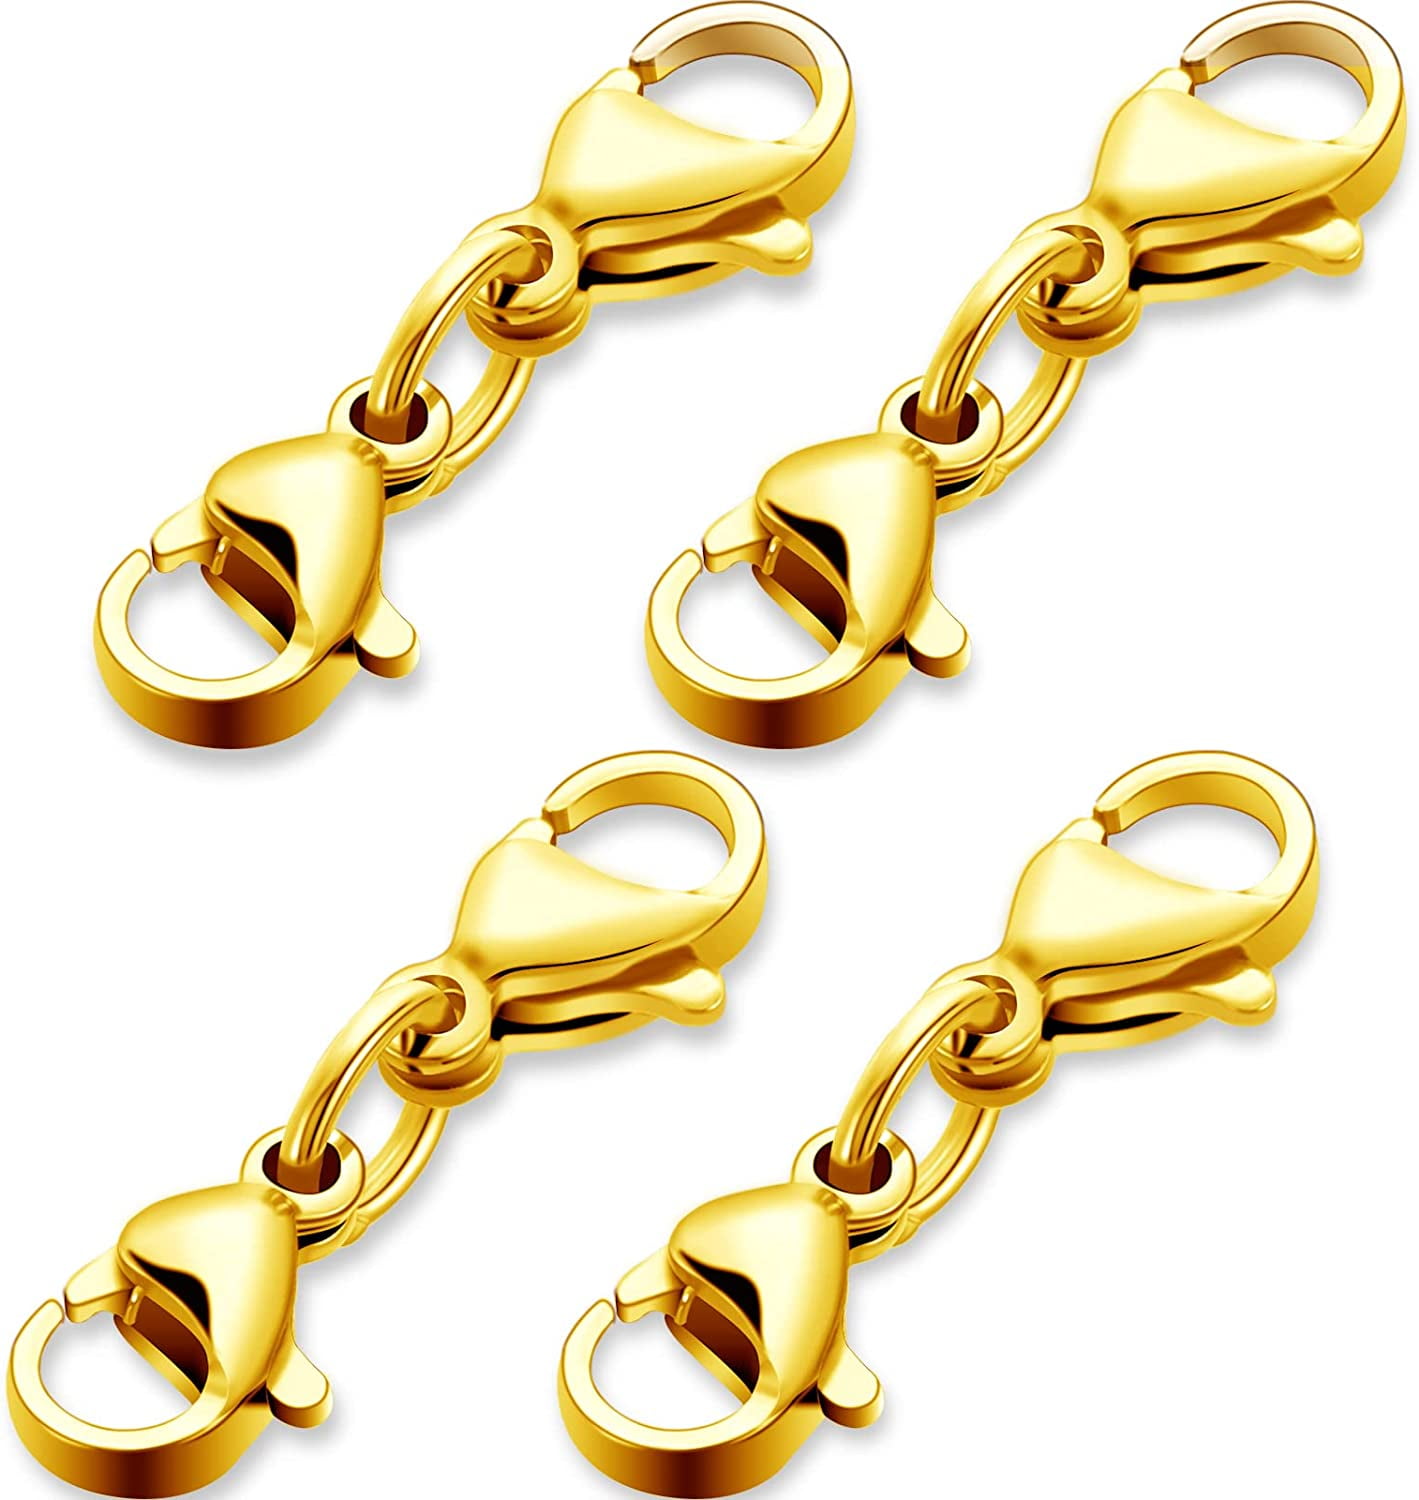 Small Classic Necklace Shortener | InfinityClips Gold